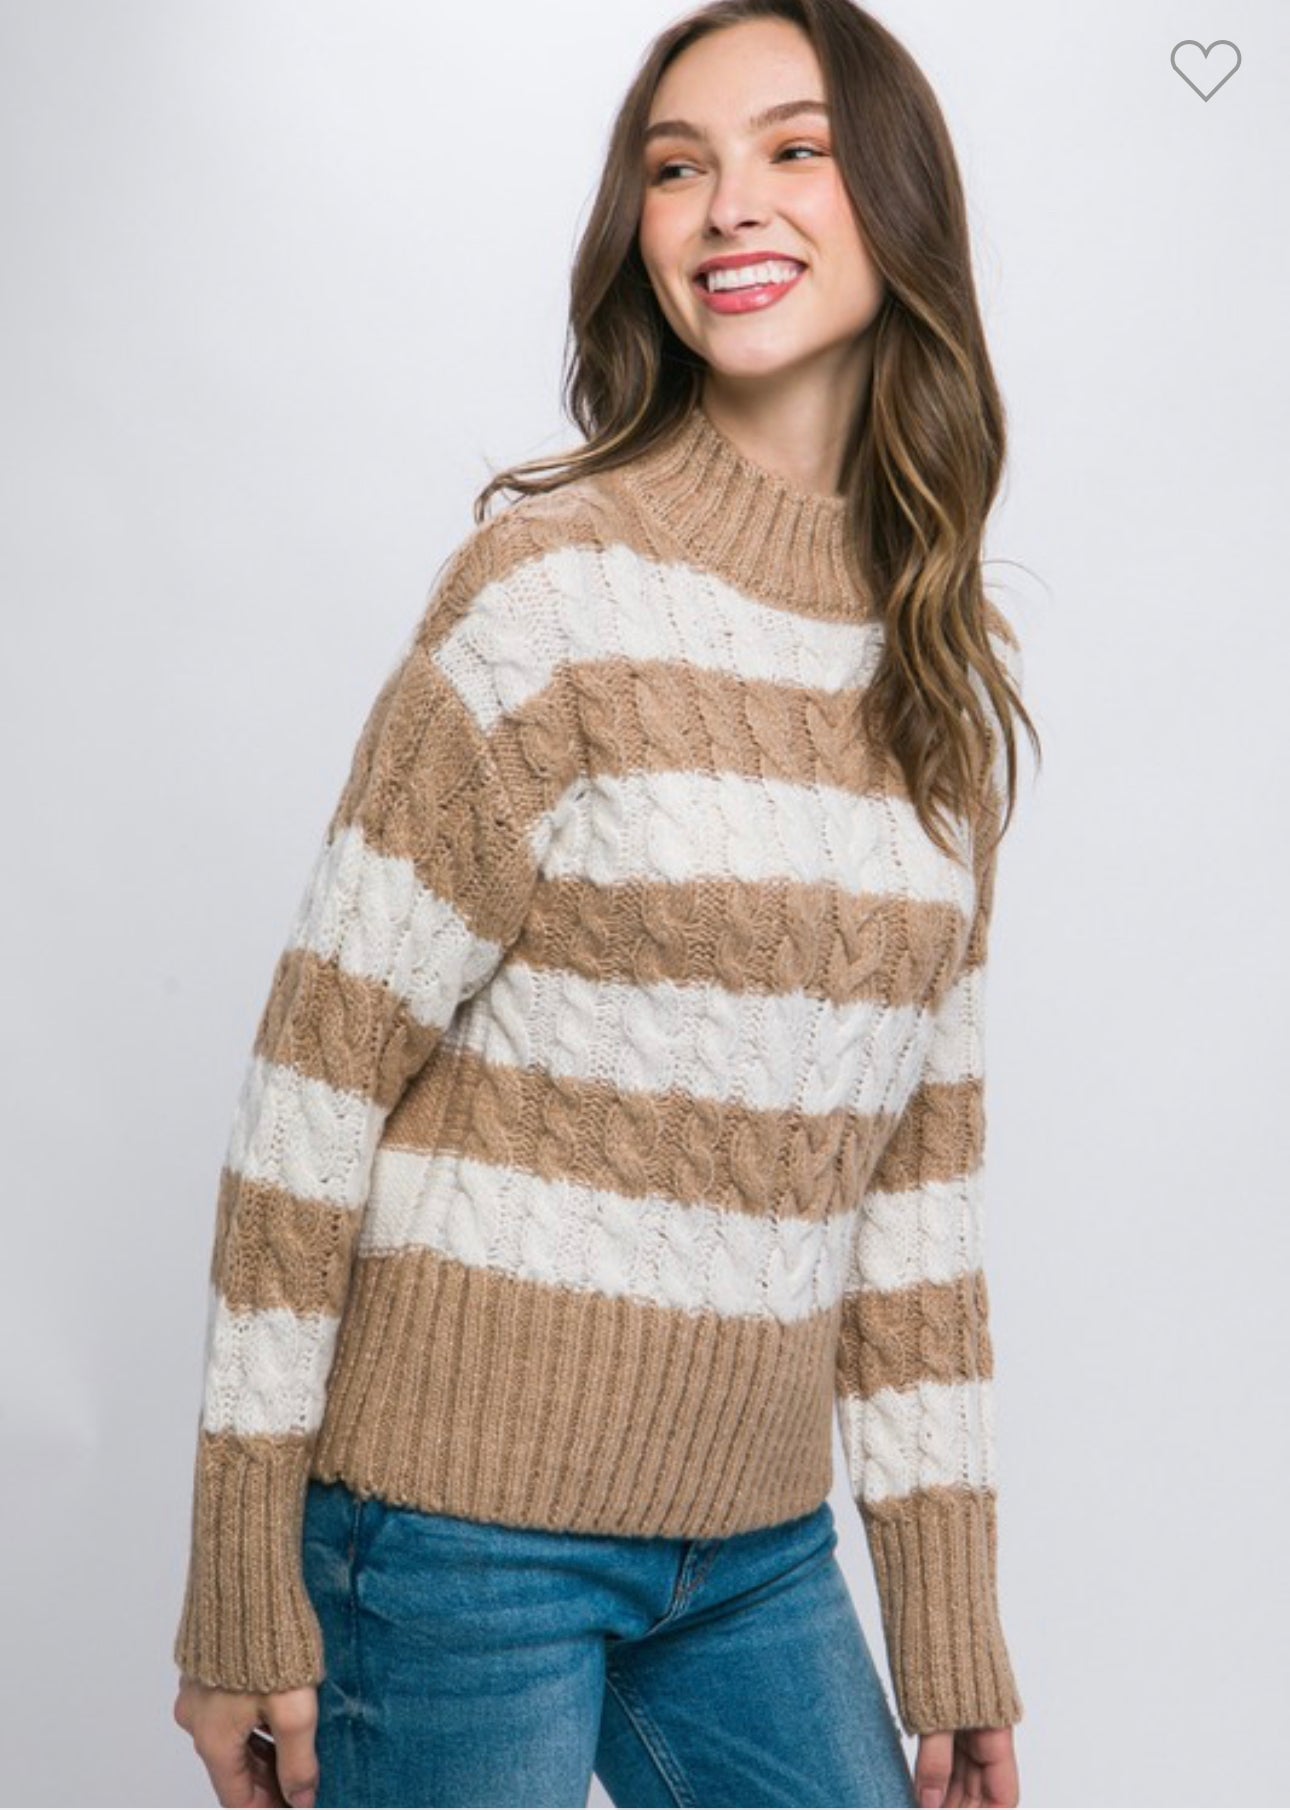 Chelsea - Khaki Striped Cable Knit Sweater